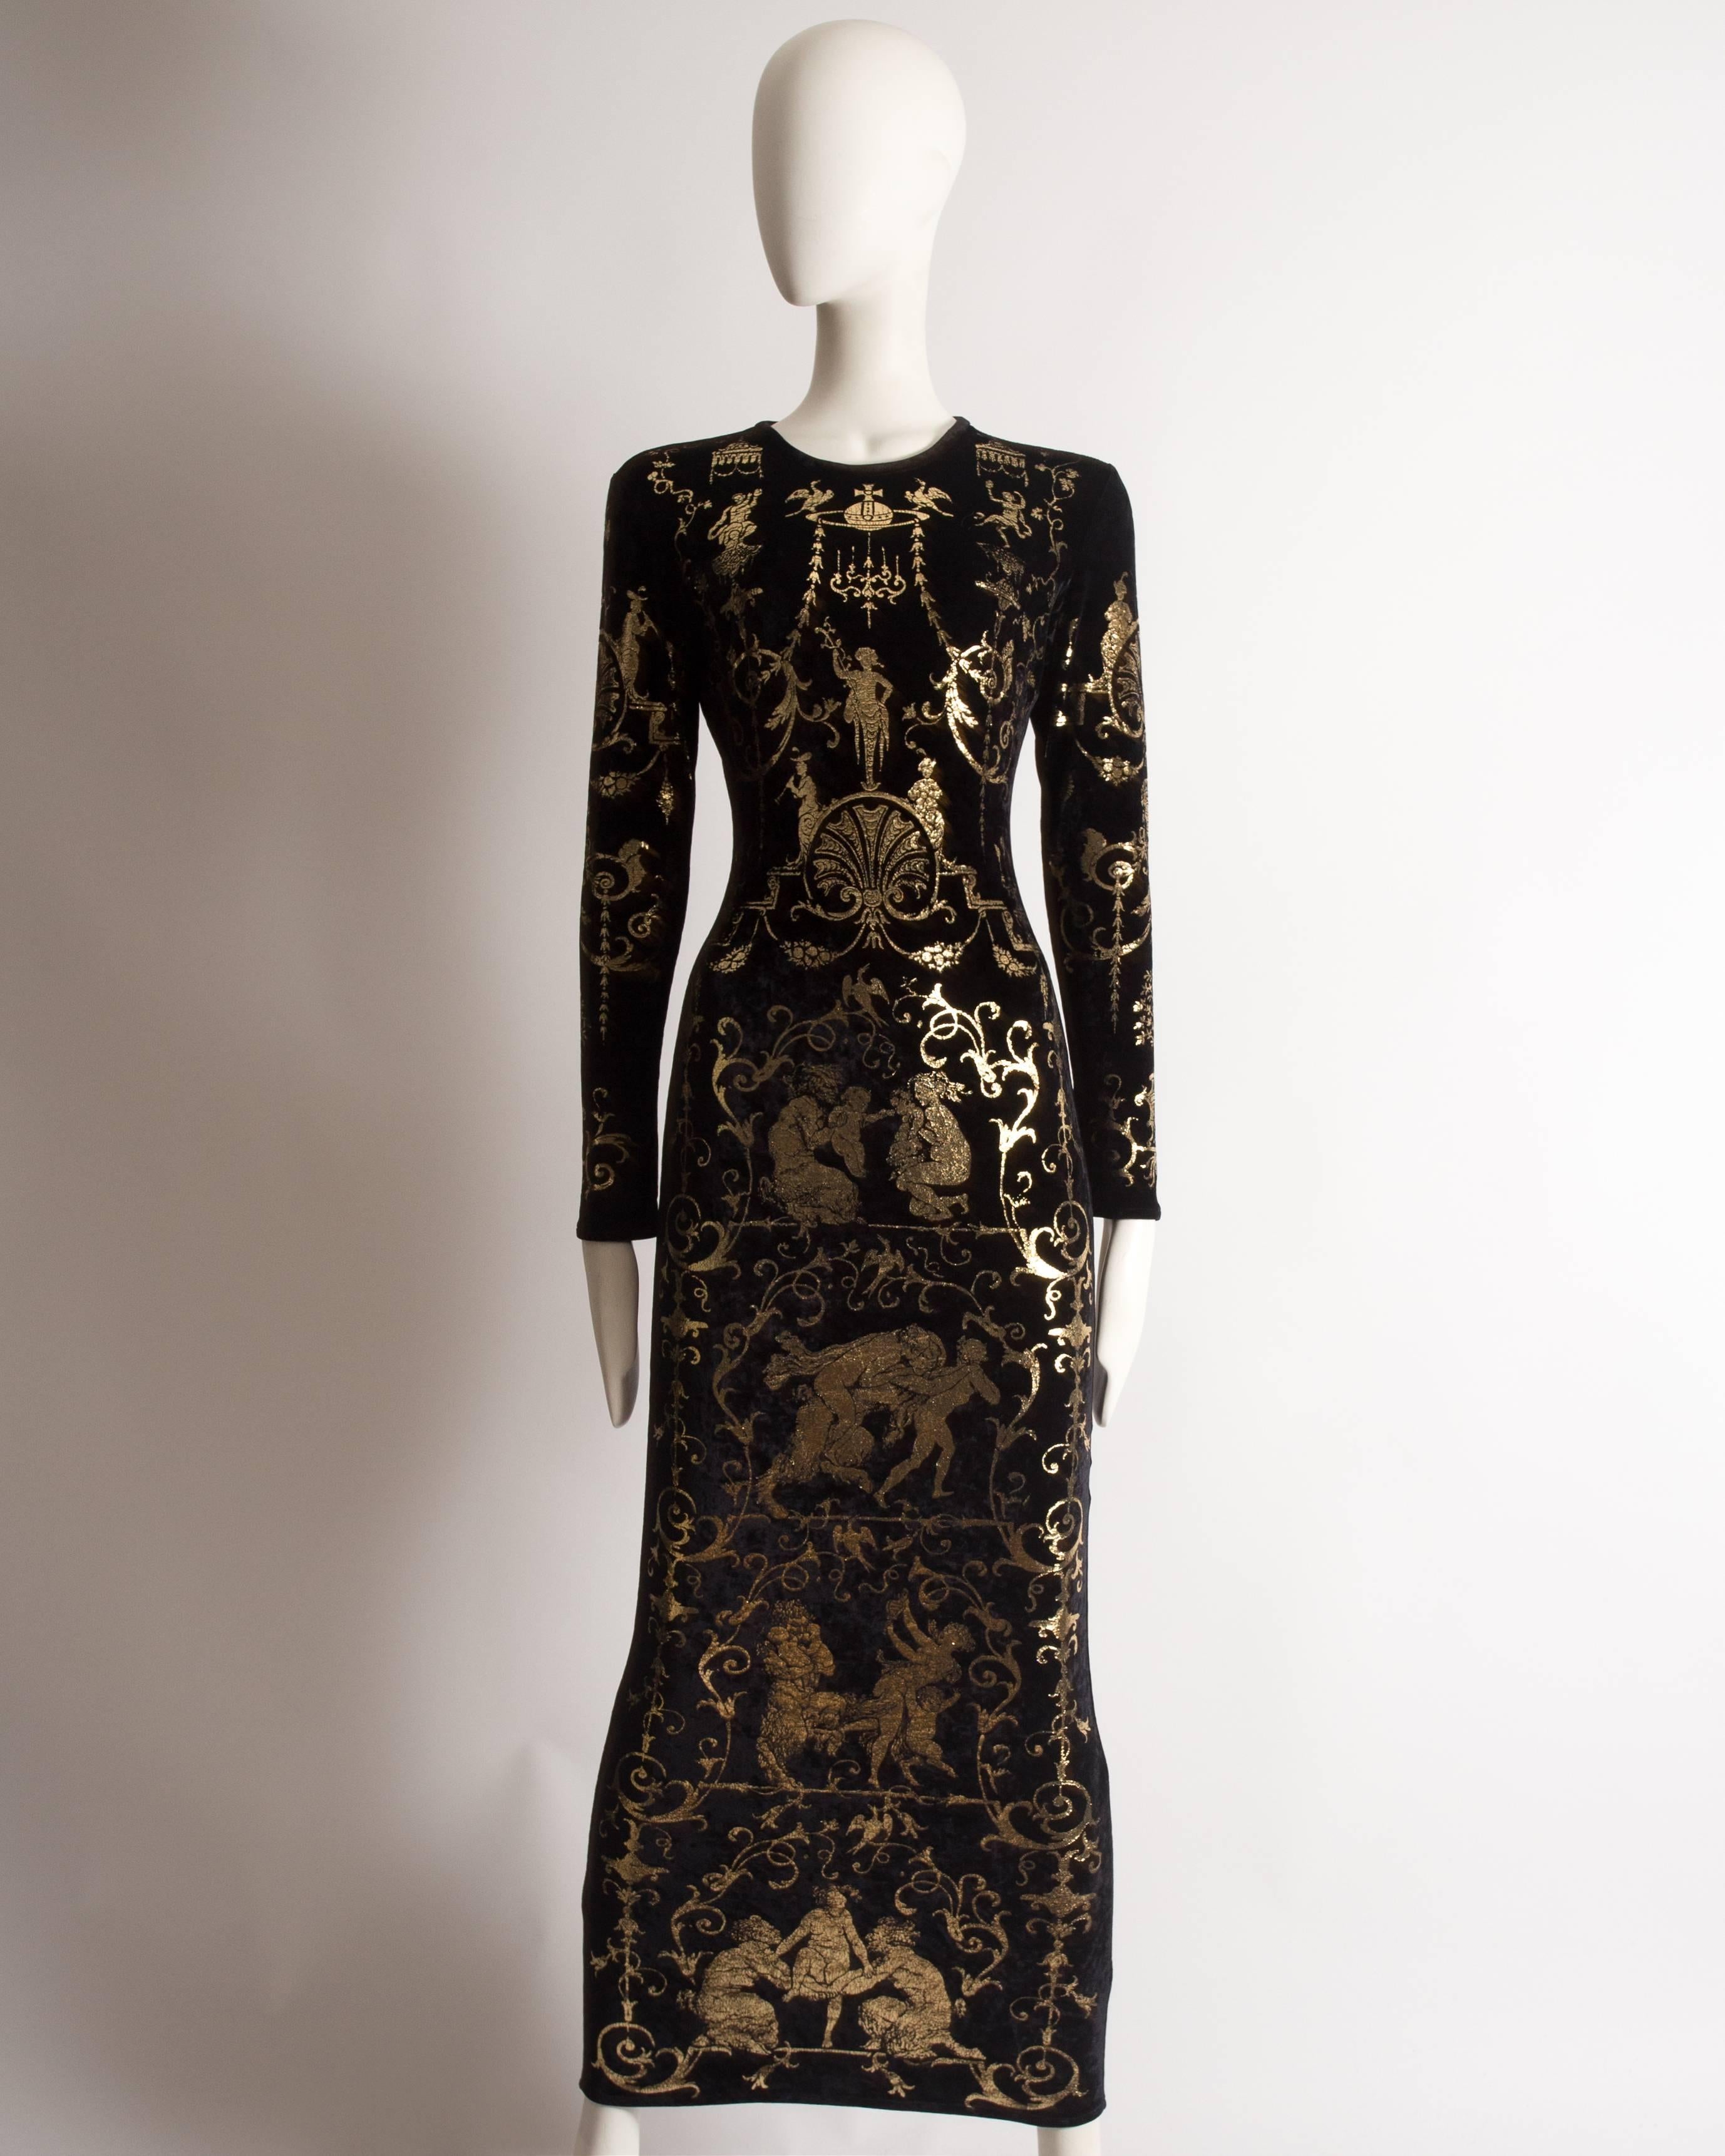 Important Vivienne Westwood long fitted sheath dress constructed in black viscose/lycra with long sleeves, scoop neck, and zip closure. Screen-printed gold with neoclassical designs inspired by the Mirror with marquetry by Andre-Charles Boulle